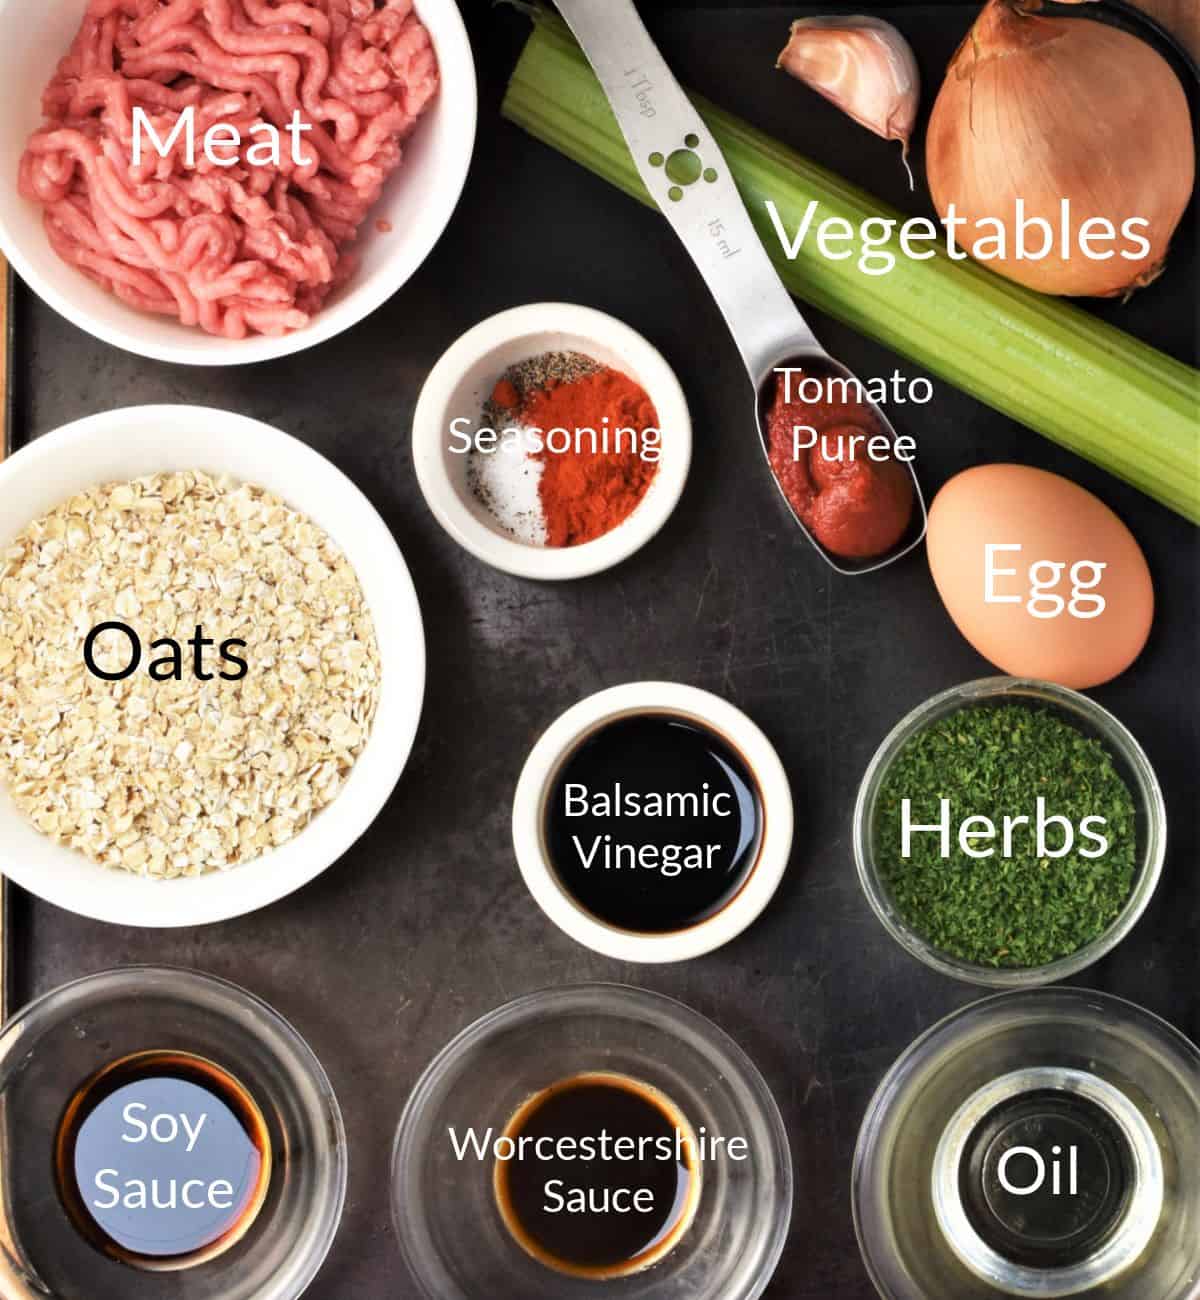 Ingredients for making meatloaf with oats in individual dishes.